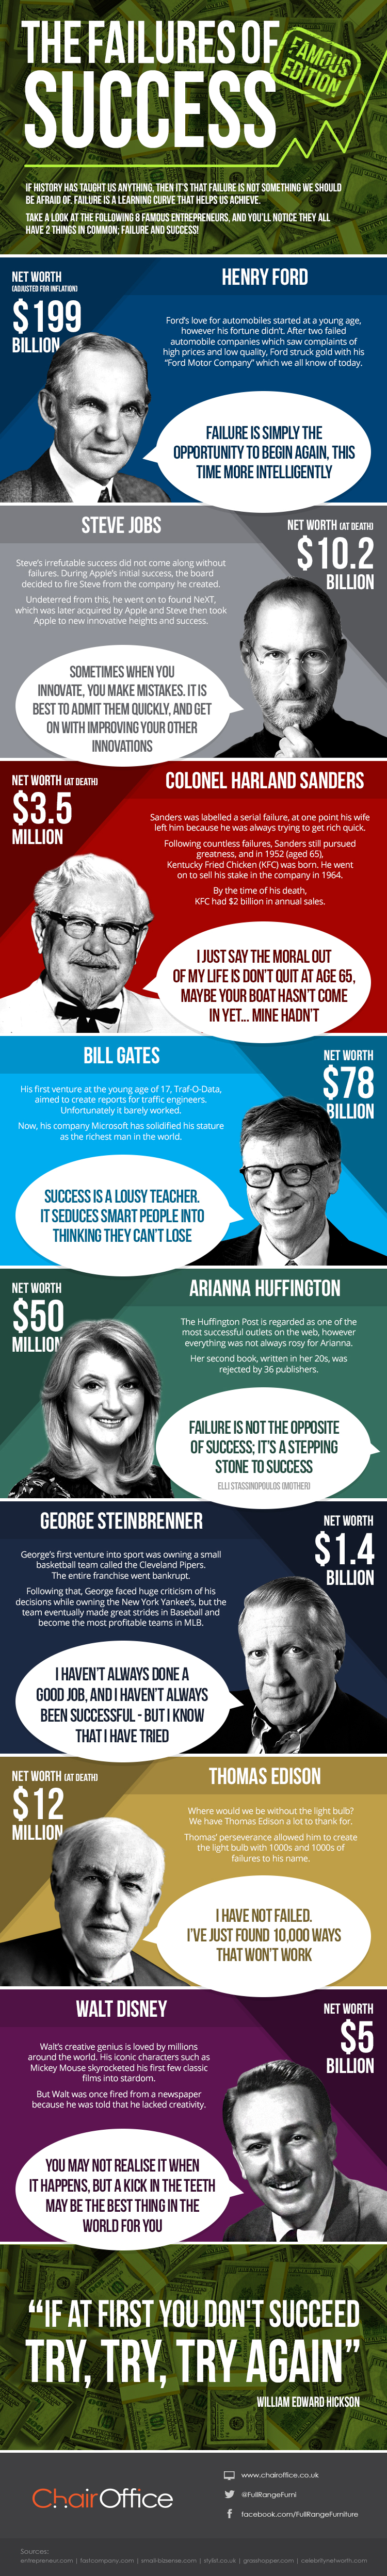 the failures of success infographic